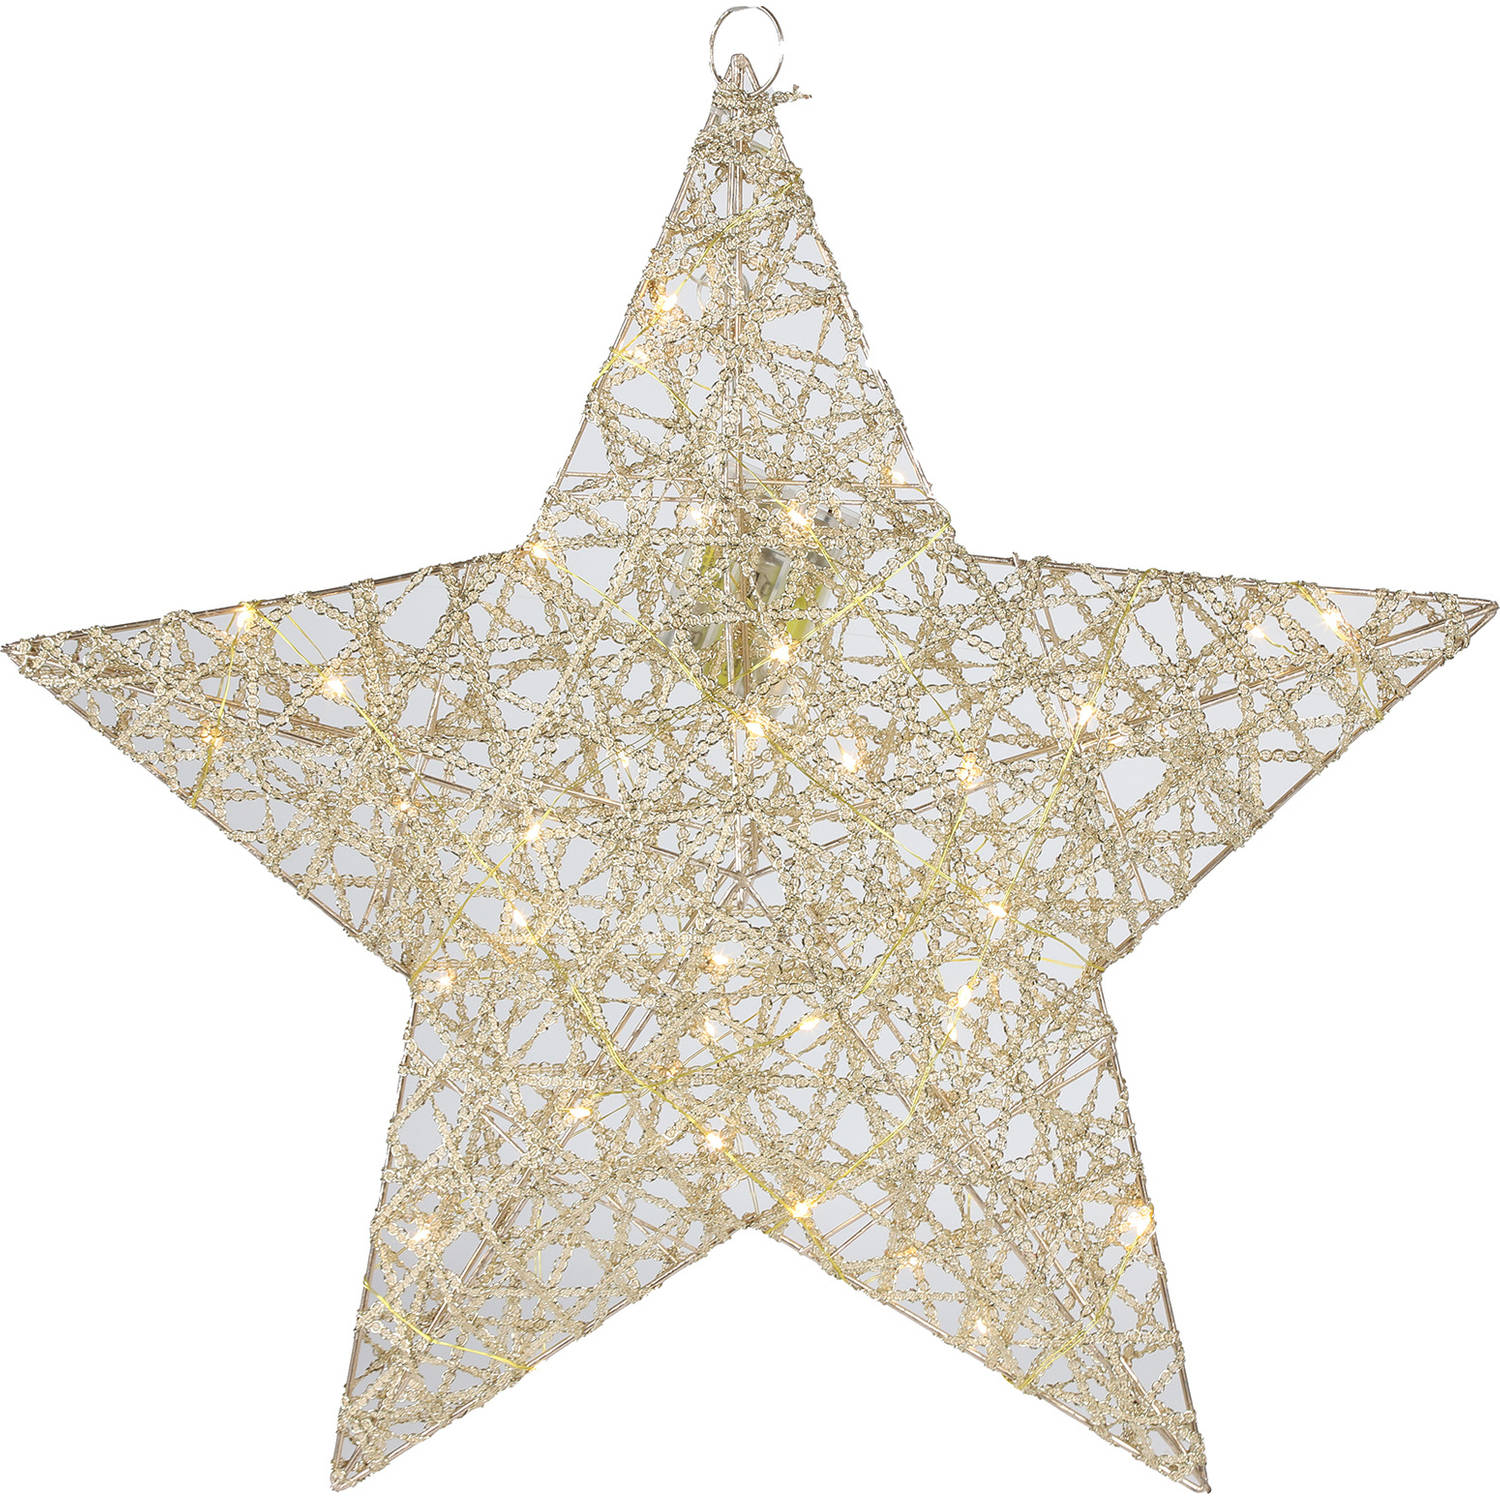 TOM kerstster Leonie A led 11 x 50 x 50 cm staal goud